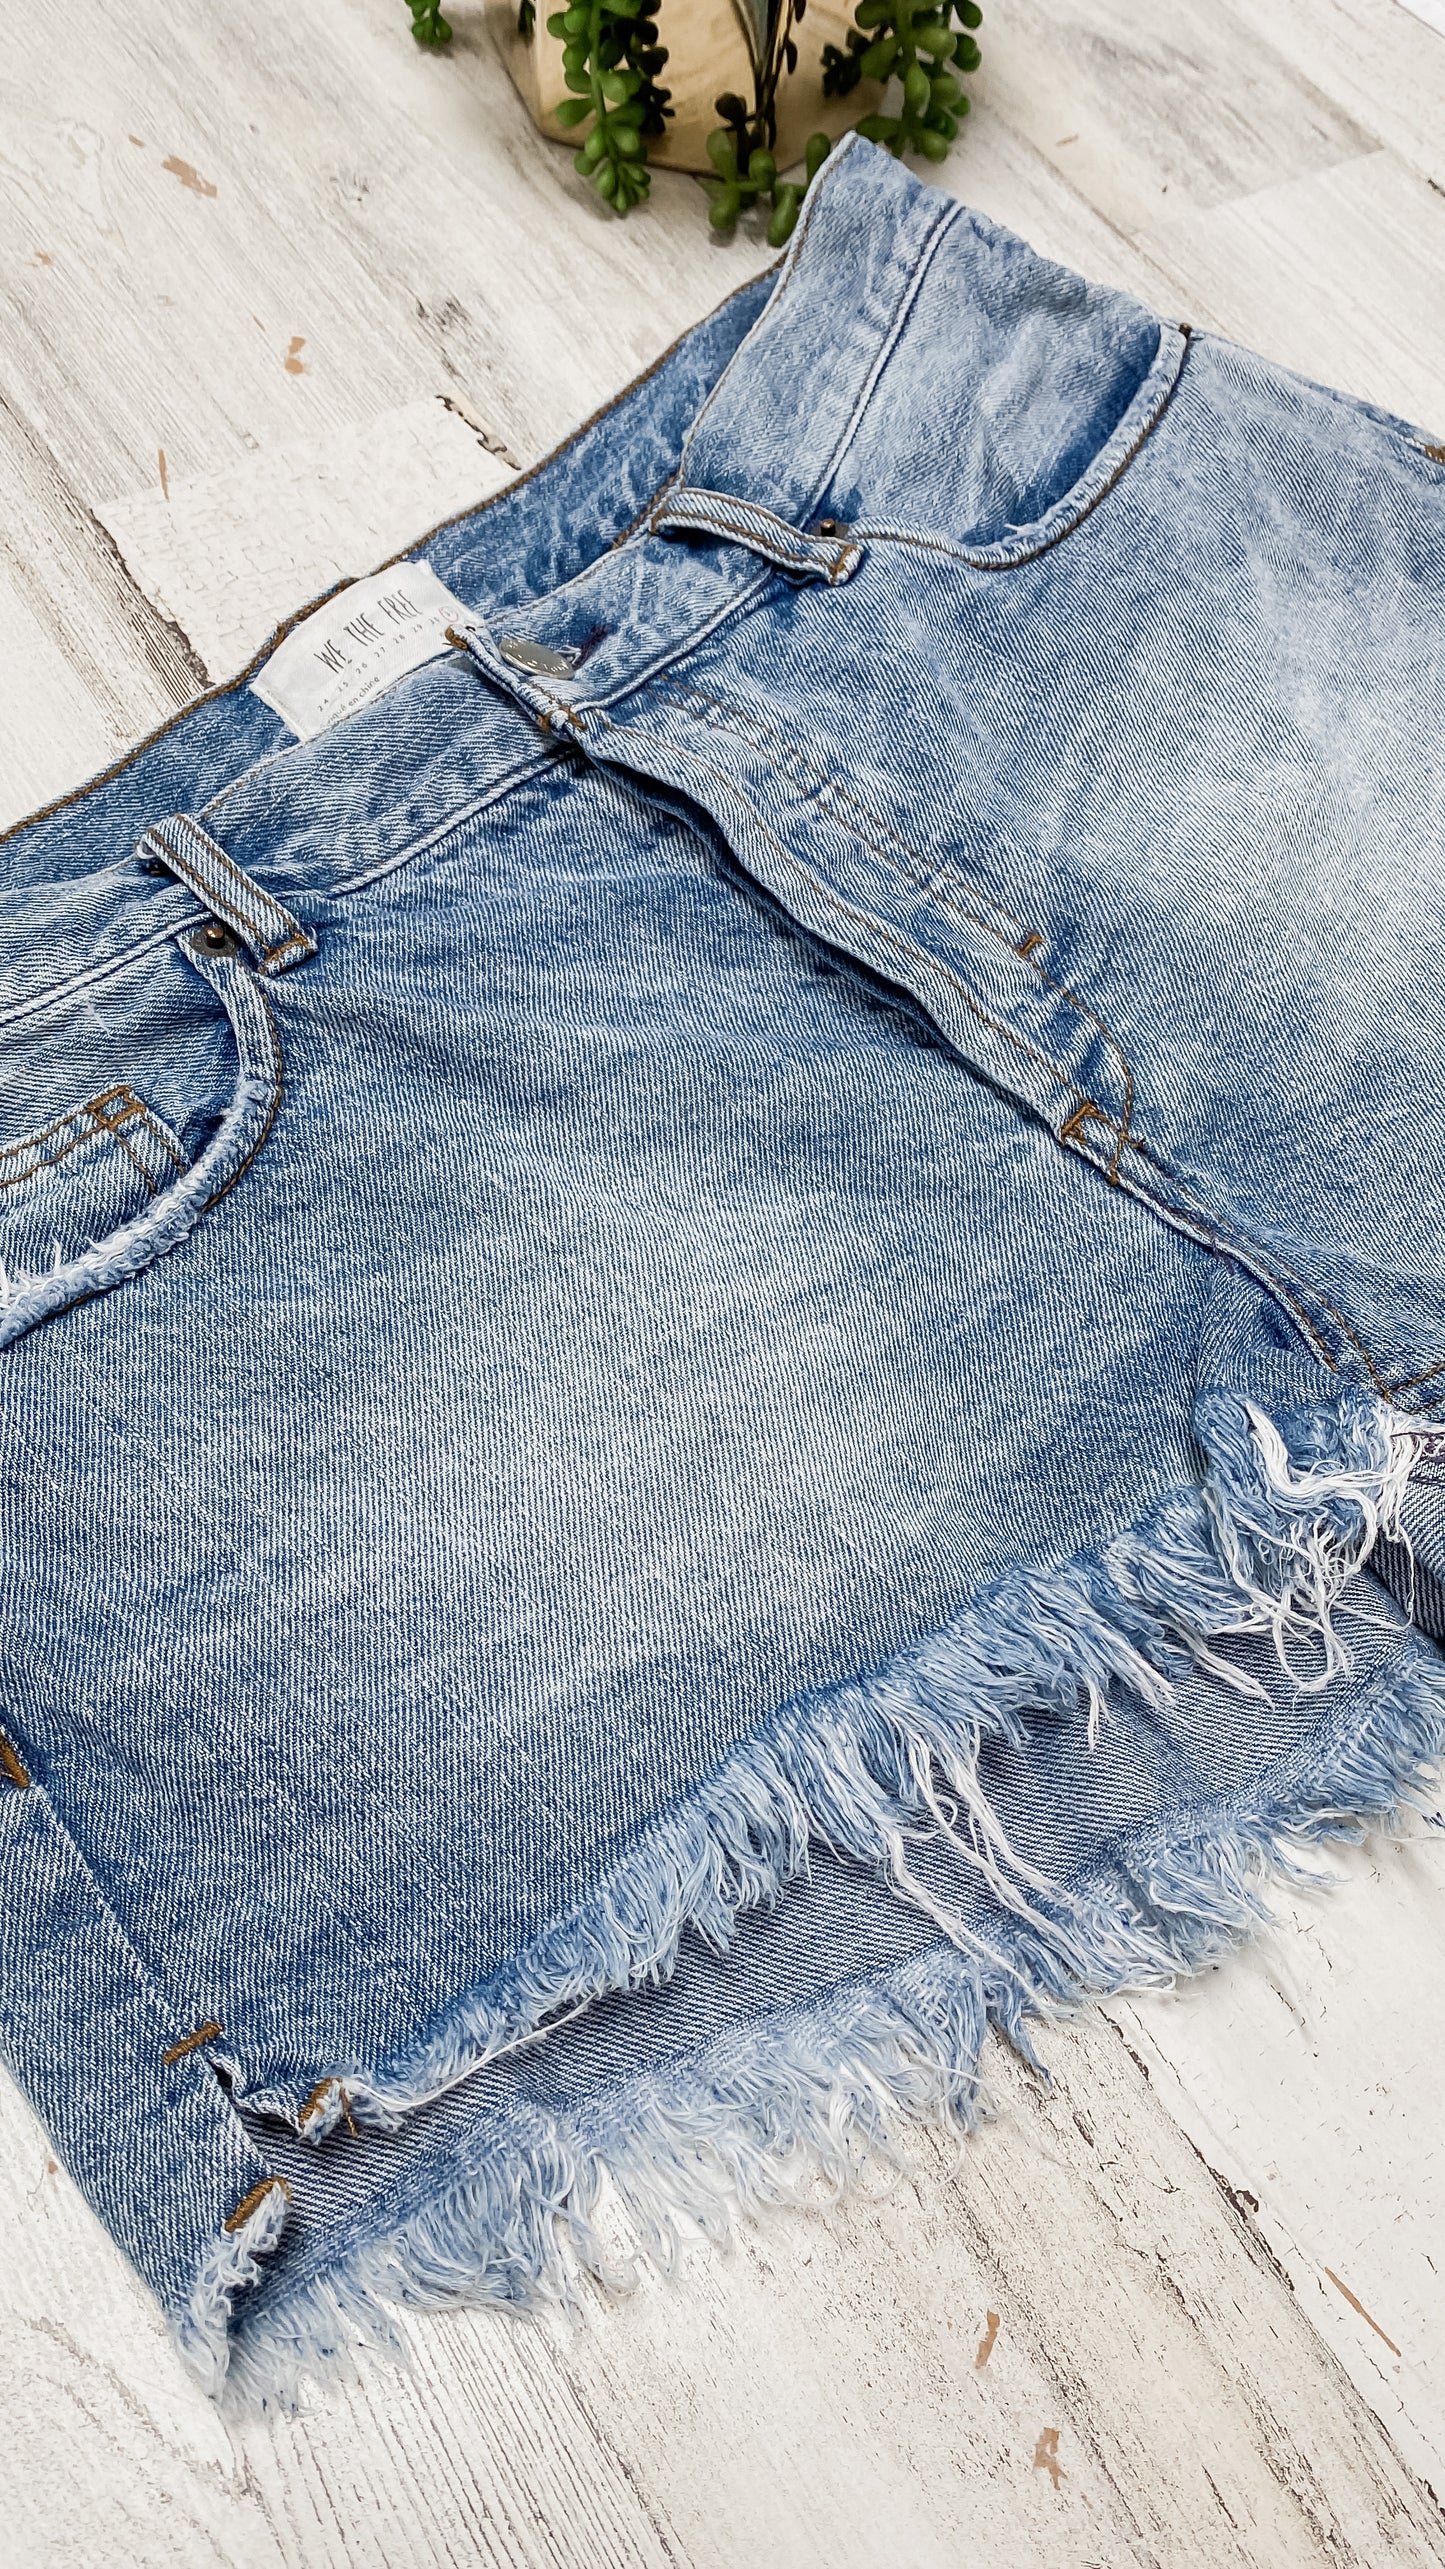 Free People Button Fly Cut Off Jean Shorts (31 or 8)